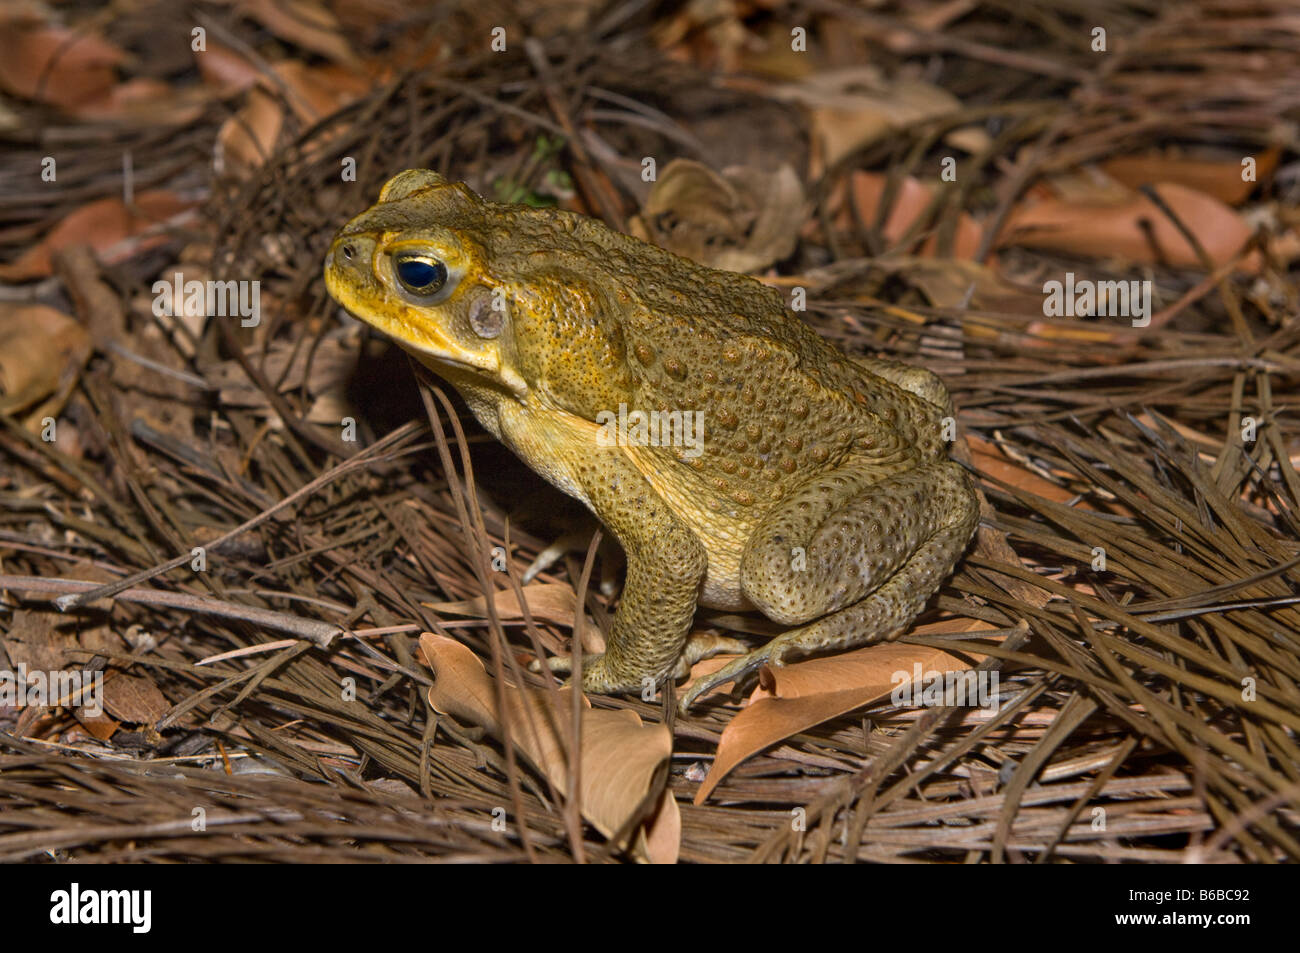 Cane Toad (Bufo marinus) adult, introduced pest species, Lichfield National Park Northern Territory Australia October Stock Photo